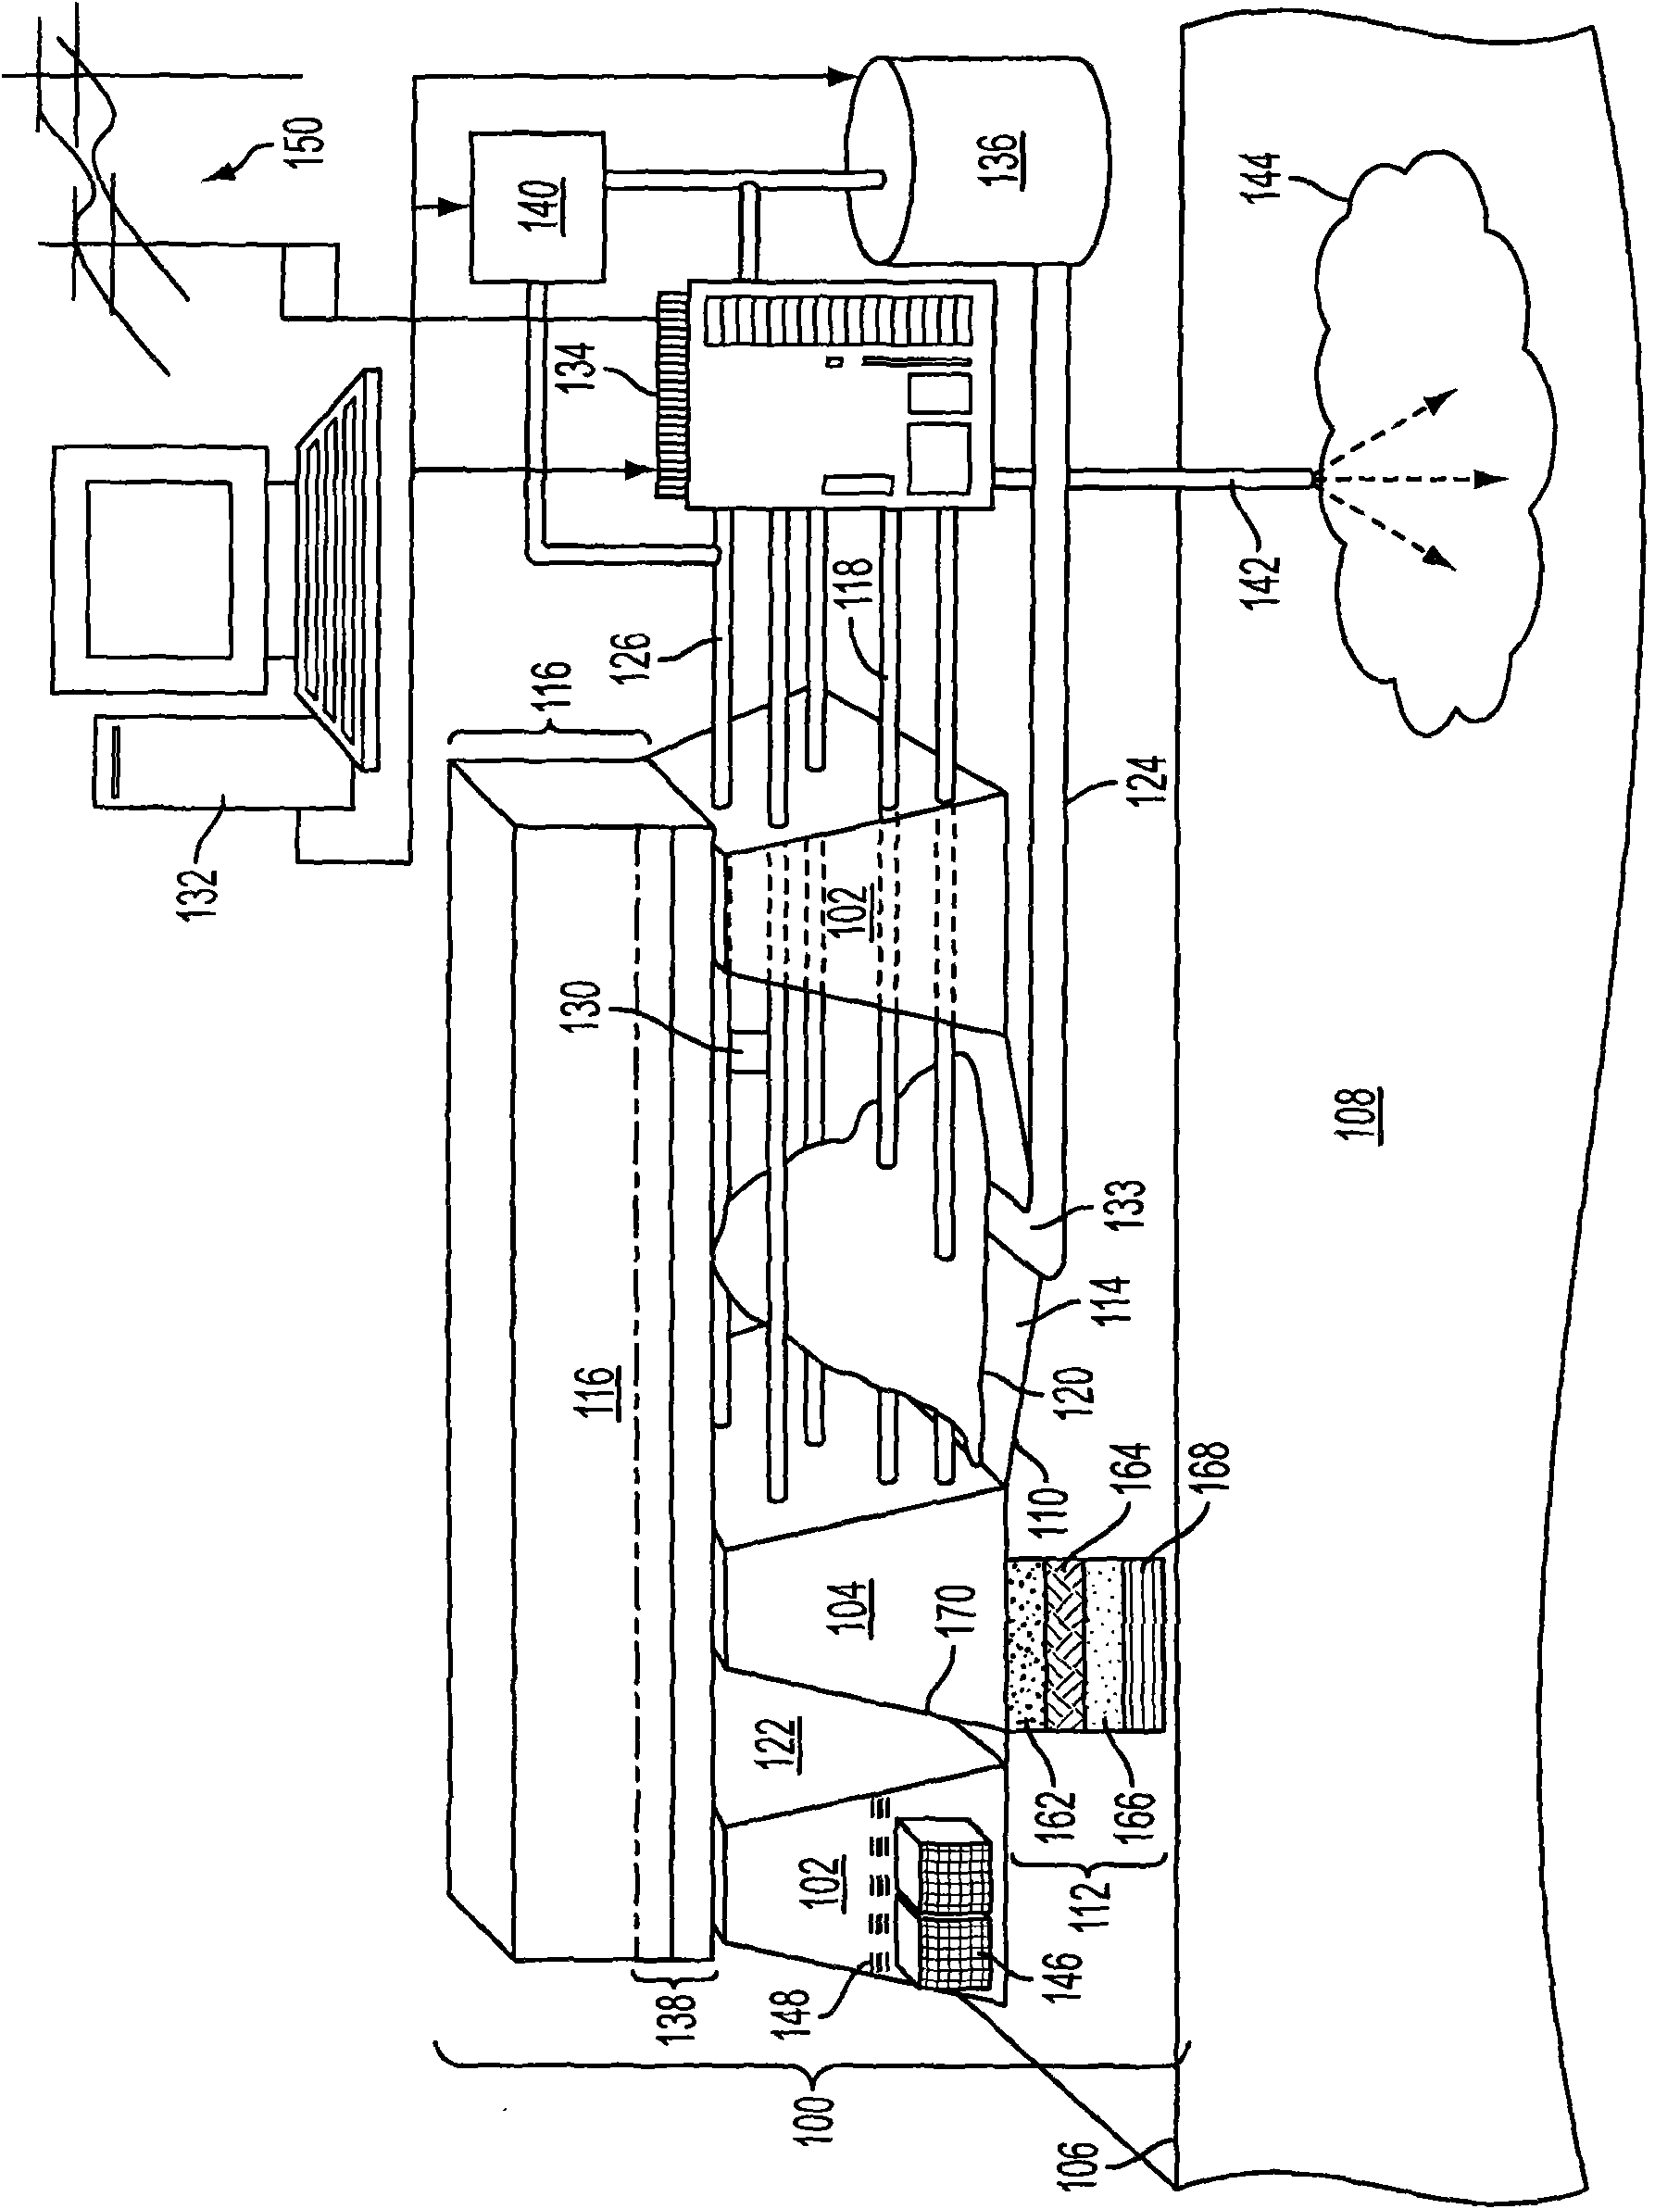 Methods of recovering hydrocarbons from hydrocarbonaceous material using a constructed infrastructure and associated systems